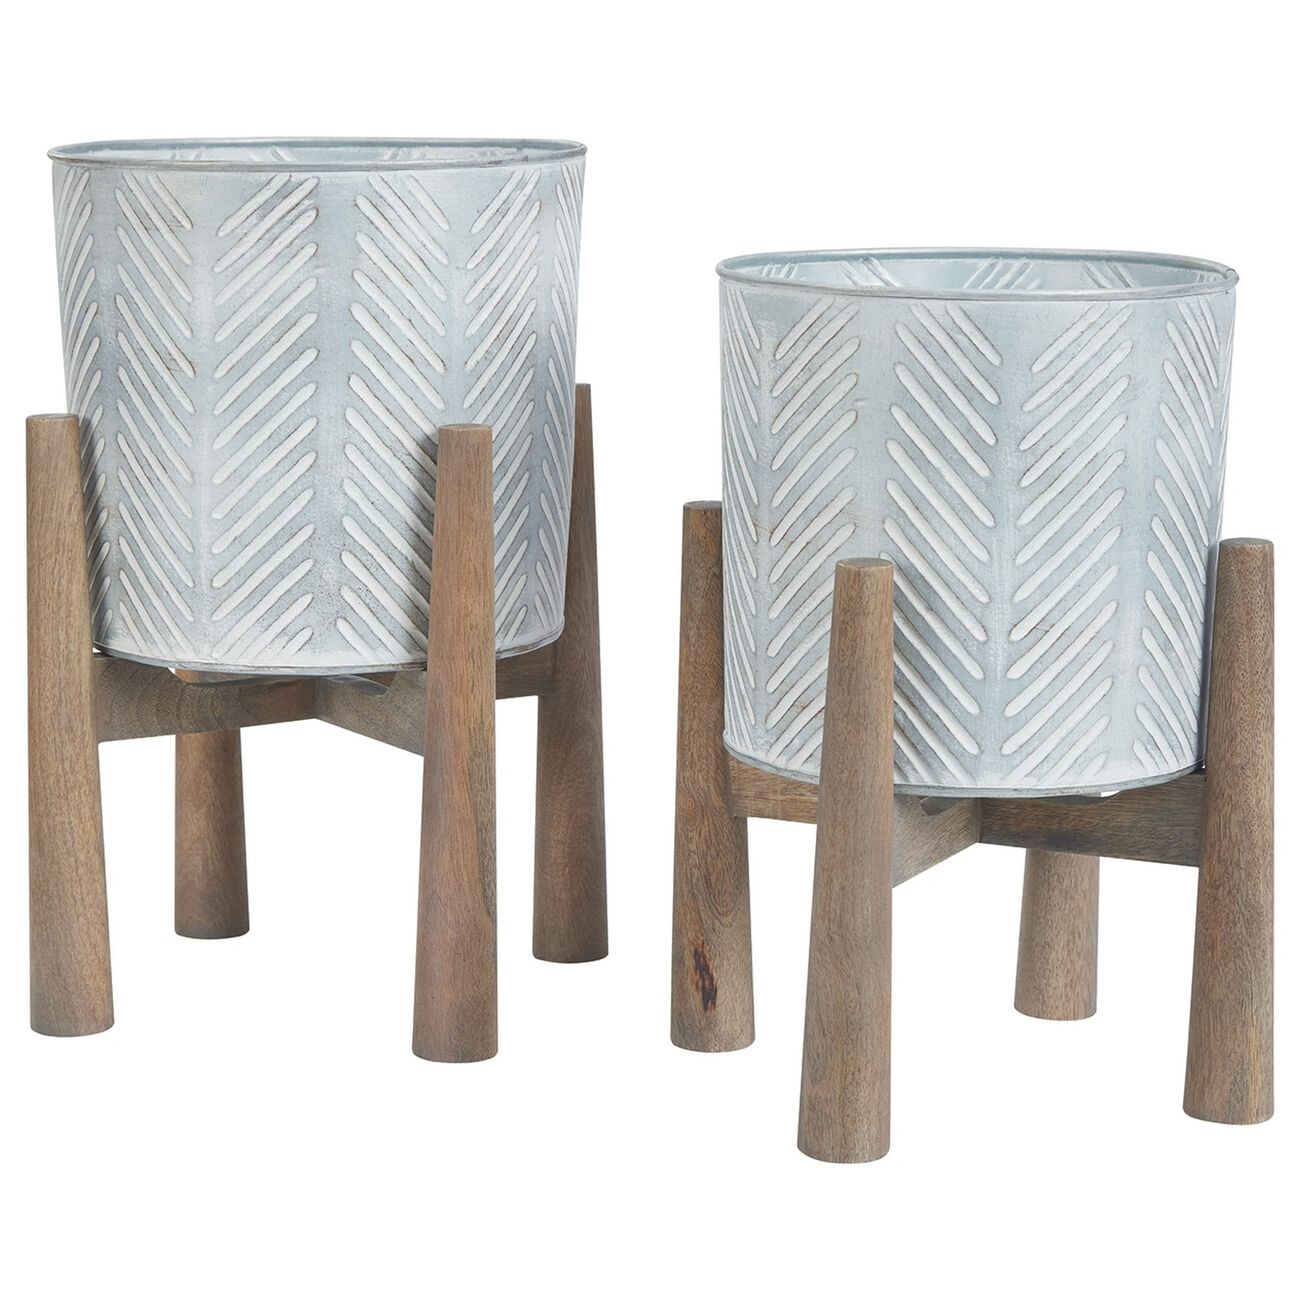 Round Metal Planter Set with Wood Stand,Set of 2,Galvanized Gray and Brown